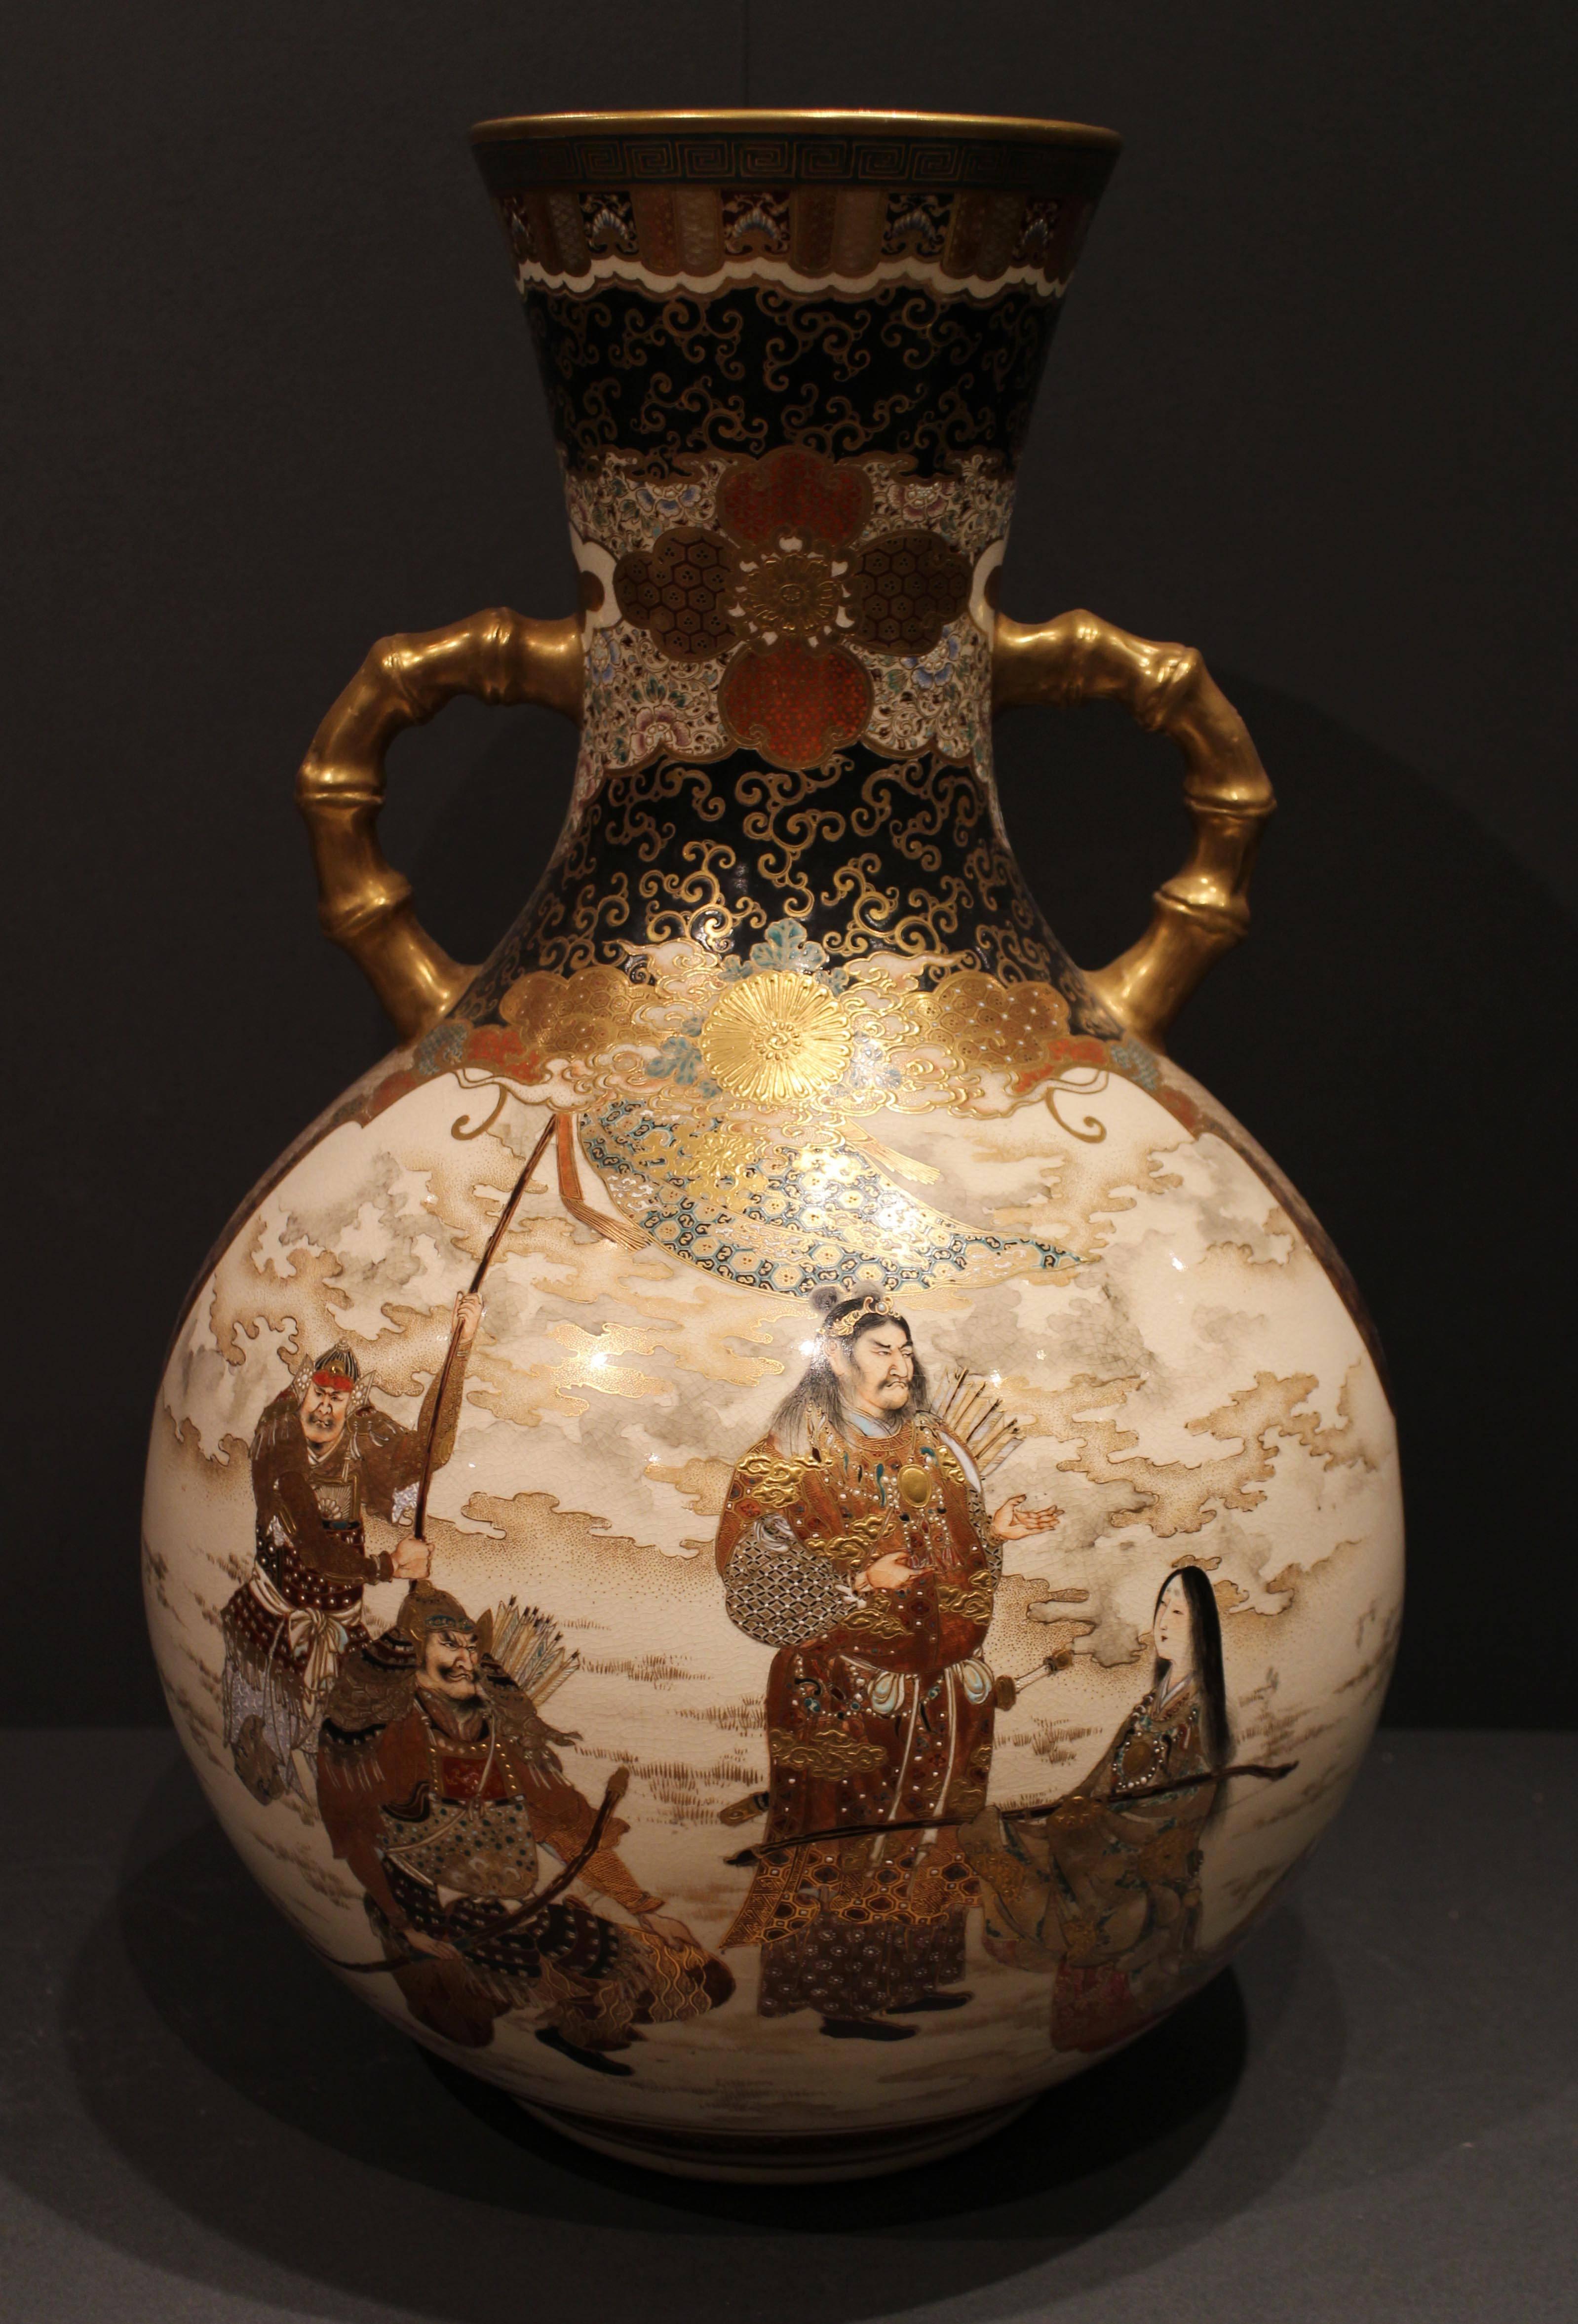 A large round antique Japanese Satsuma pottery vase, decorated in a cream, gold and orange panels of samurai warriors and bijin, on a dark blue and gold ground, the neck decorated with complex patterns, the handles of the vase are in the form of